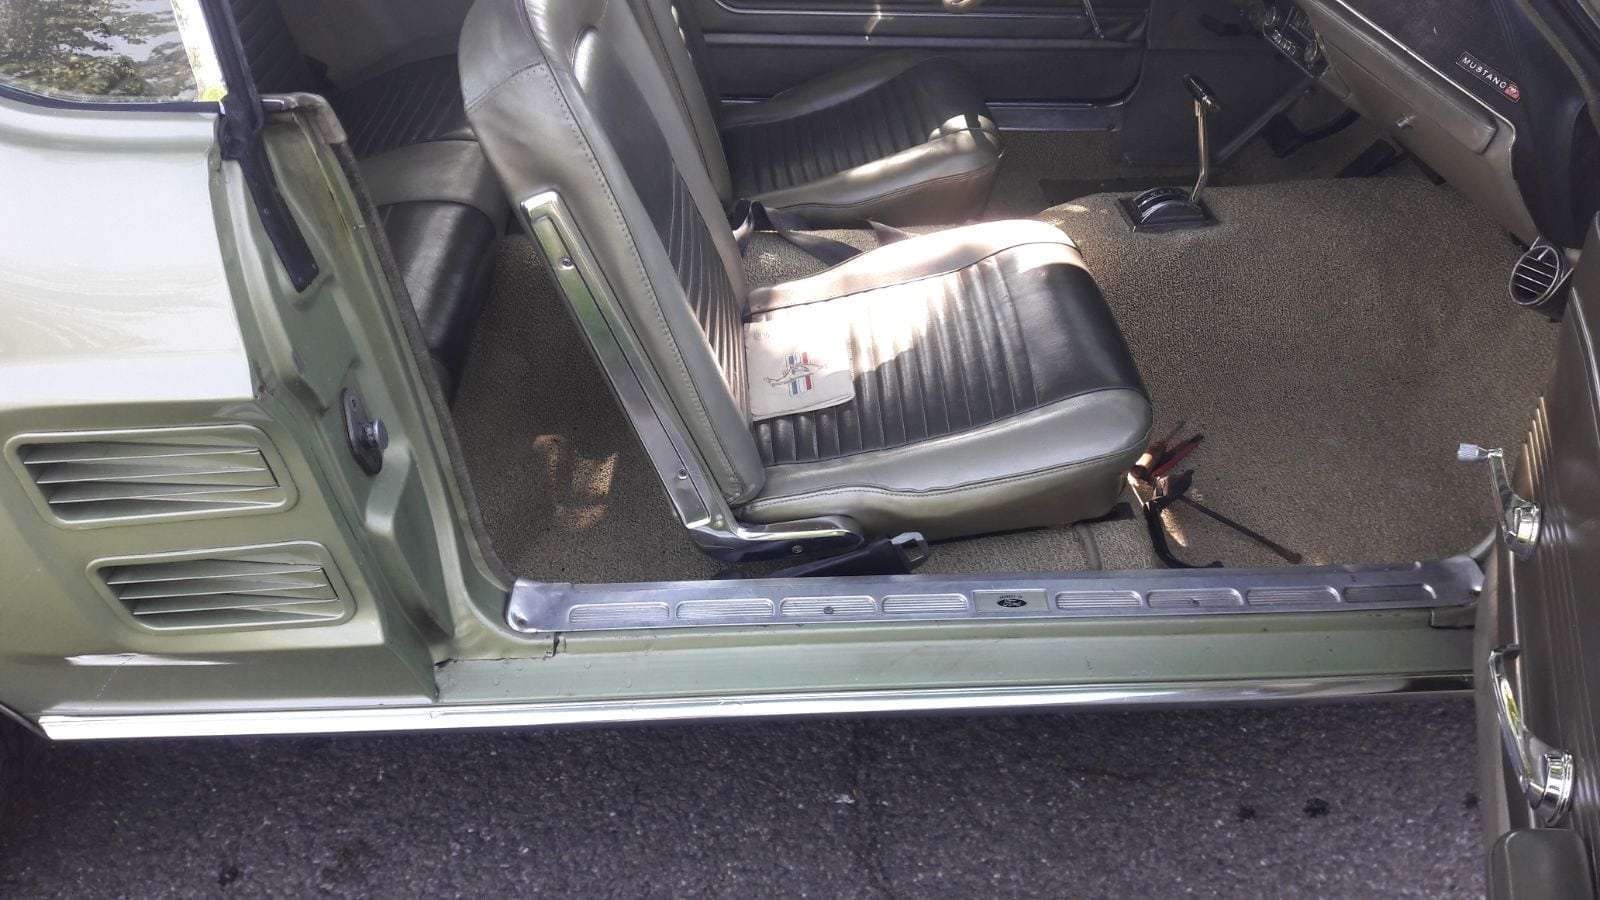 Lime gold green Ford Mustang 1967 coupe standard green interior #705